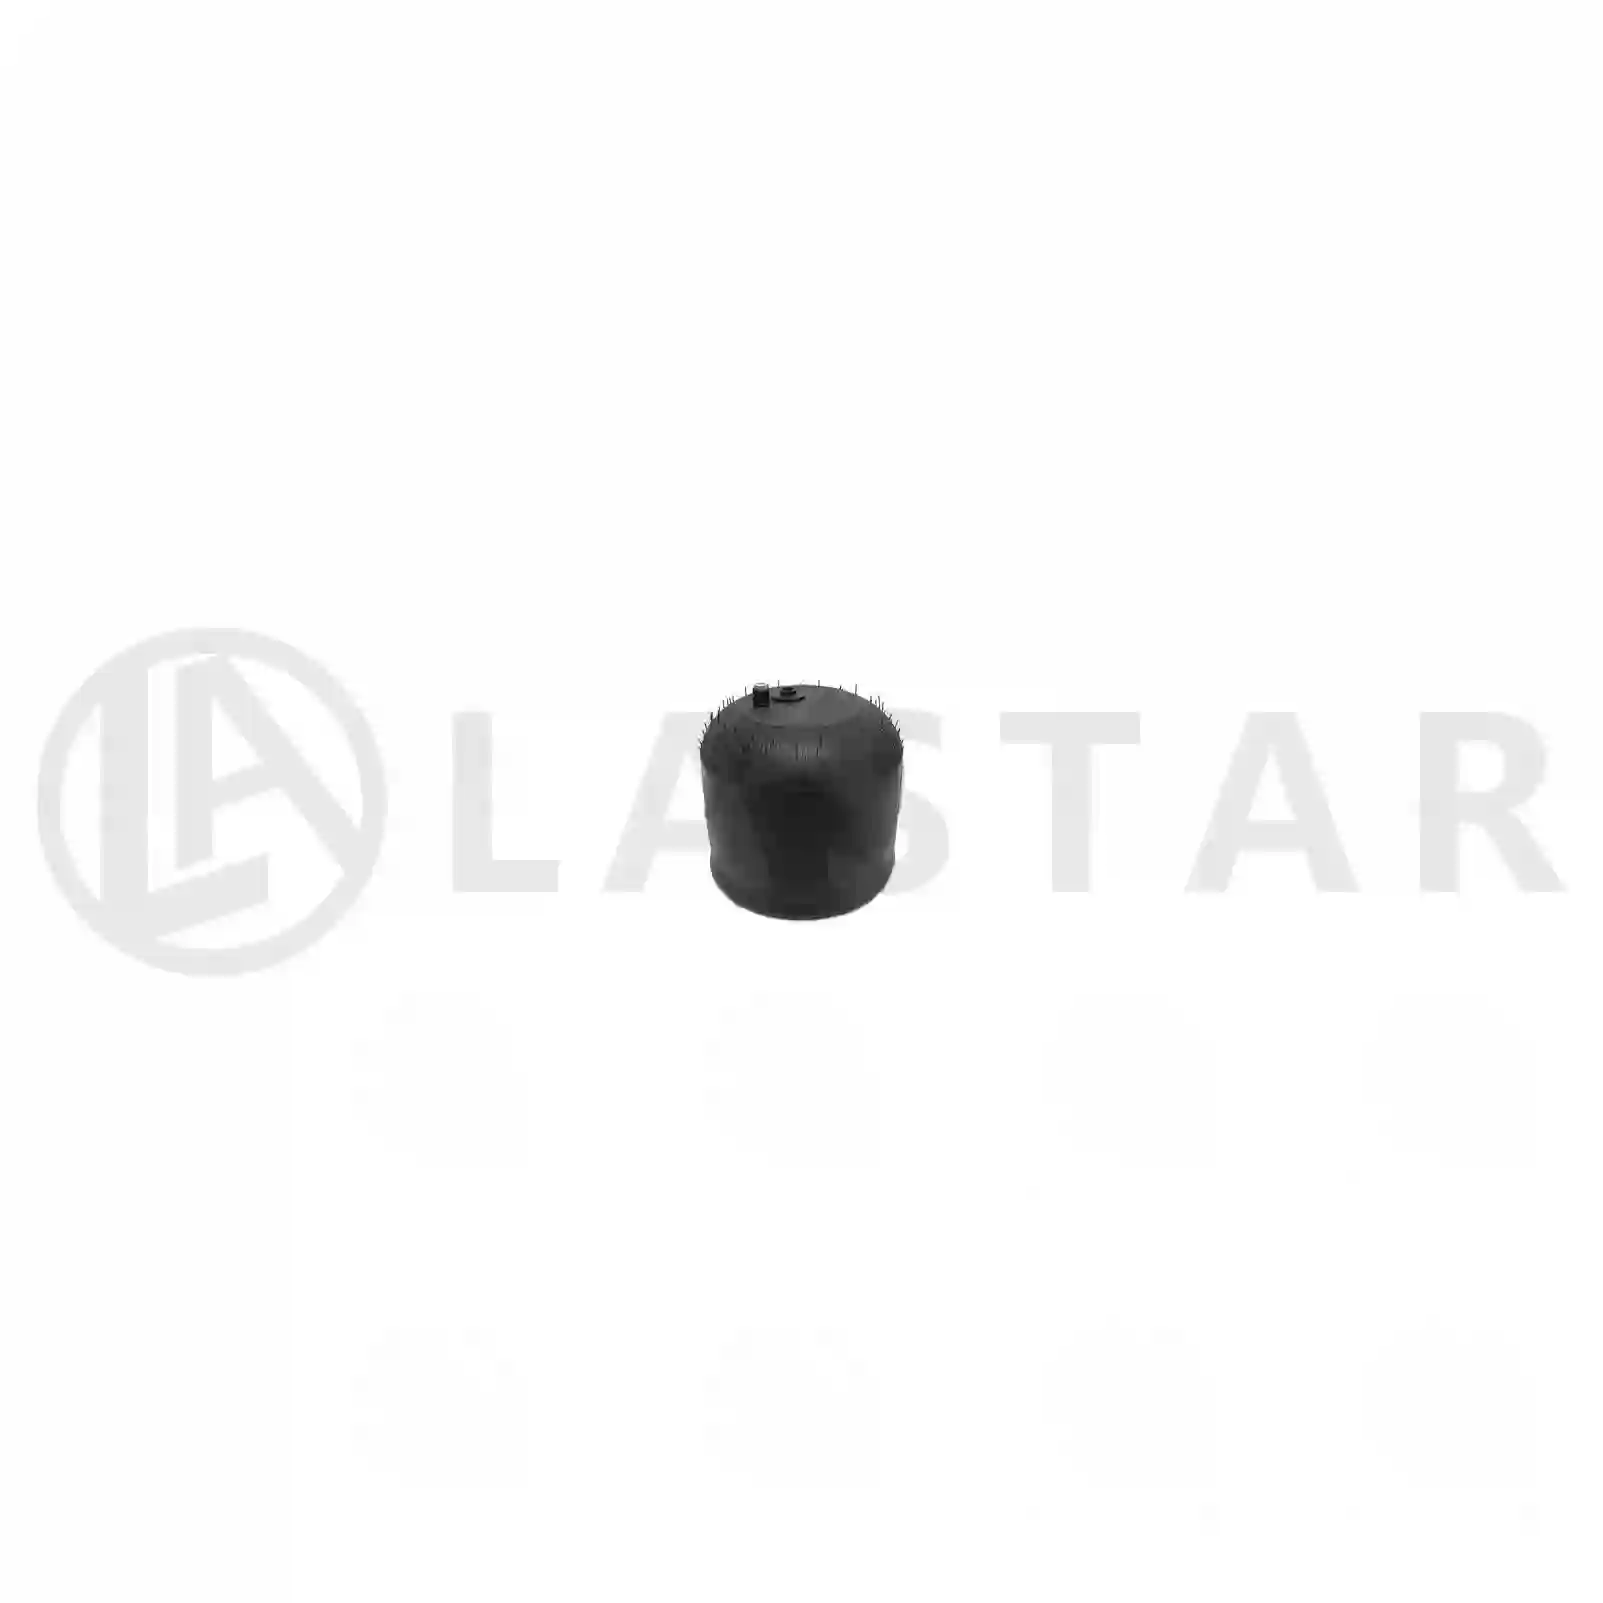 Air spring, with steel piston, 77728252, 9423201921, 9423202721, 9423207321 ||  77728252 Lastar Spare Part | Truck Spare Parts, Auotomotive Spare Parts Air spring, with steel piston, 77728252, 9423201921, 9423202721, 9423207321 ||  77728252 Lastar Spare Part | Truck Spare Parts, Auotomotive Spare Parts